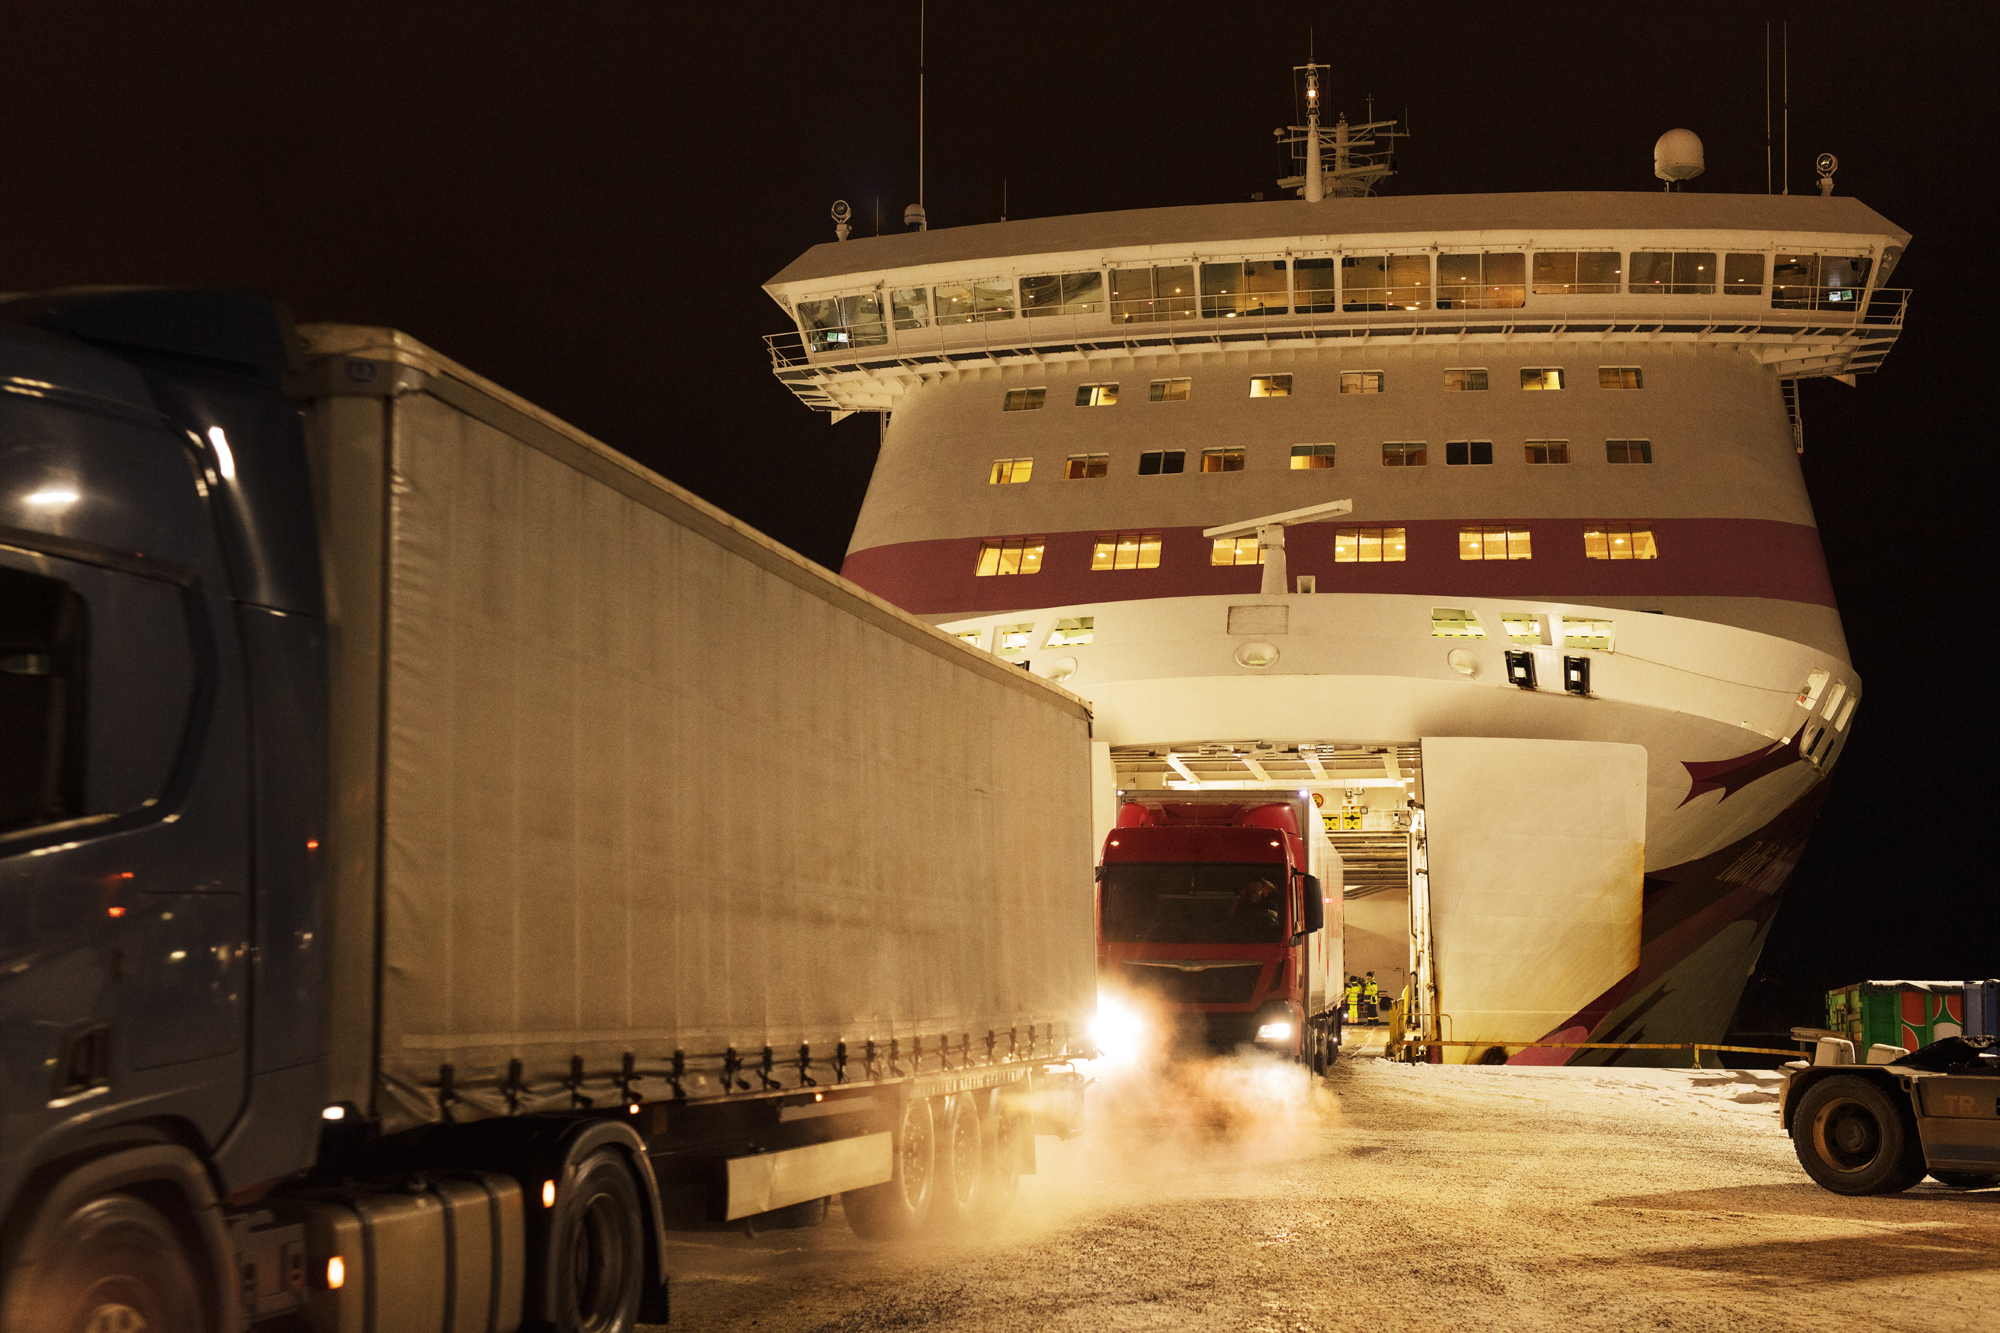 Illustration, a ship's bow and trucks at night time.